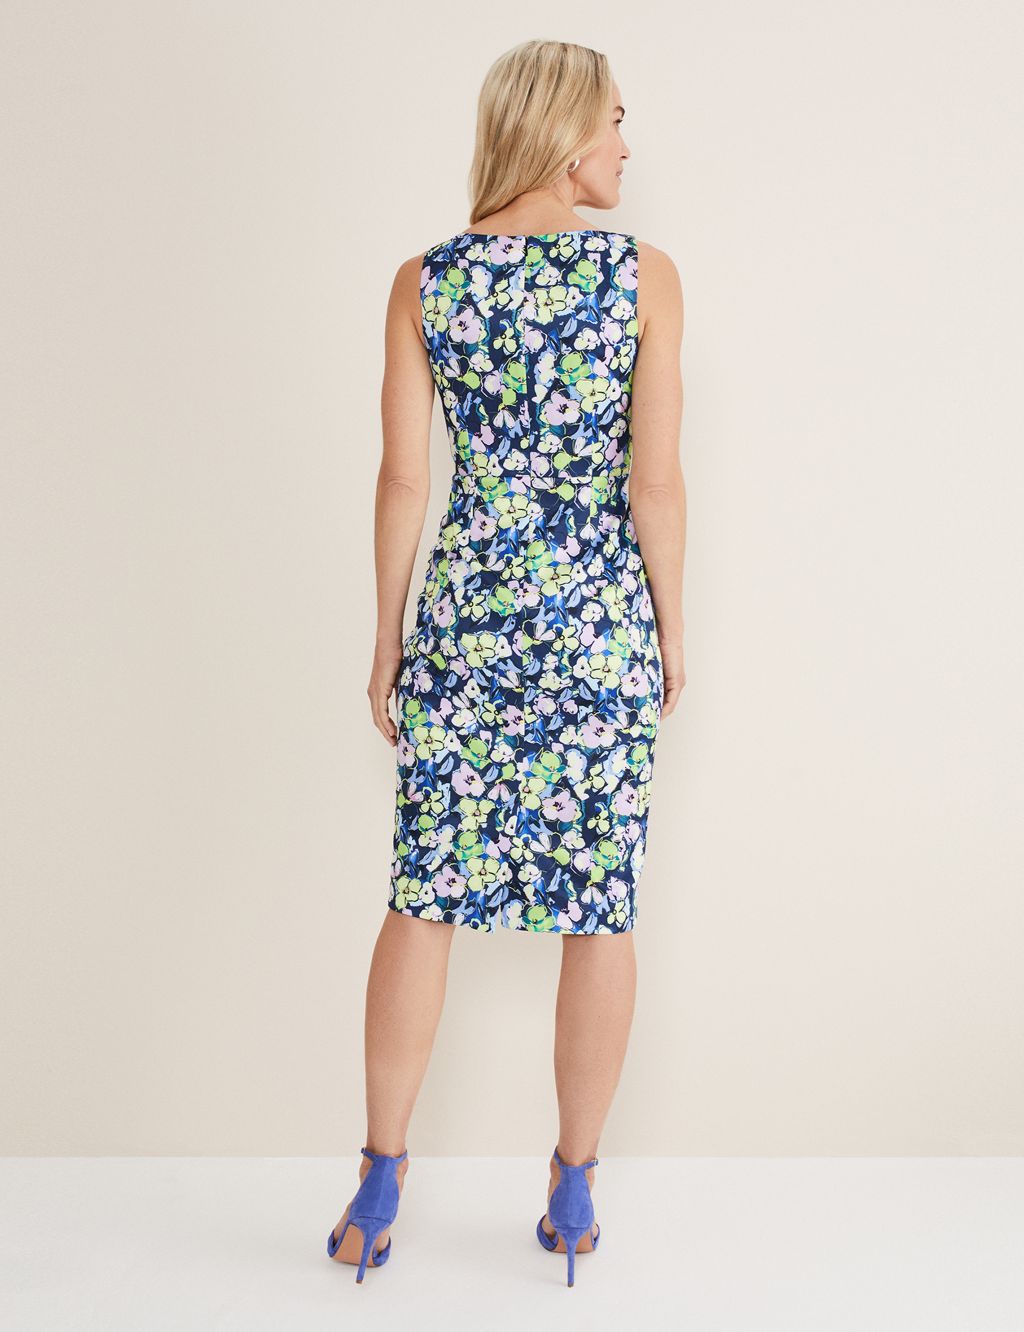 Floral Square Neck Knee Length Bodycon Dress image 5